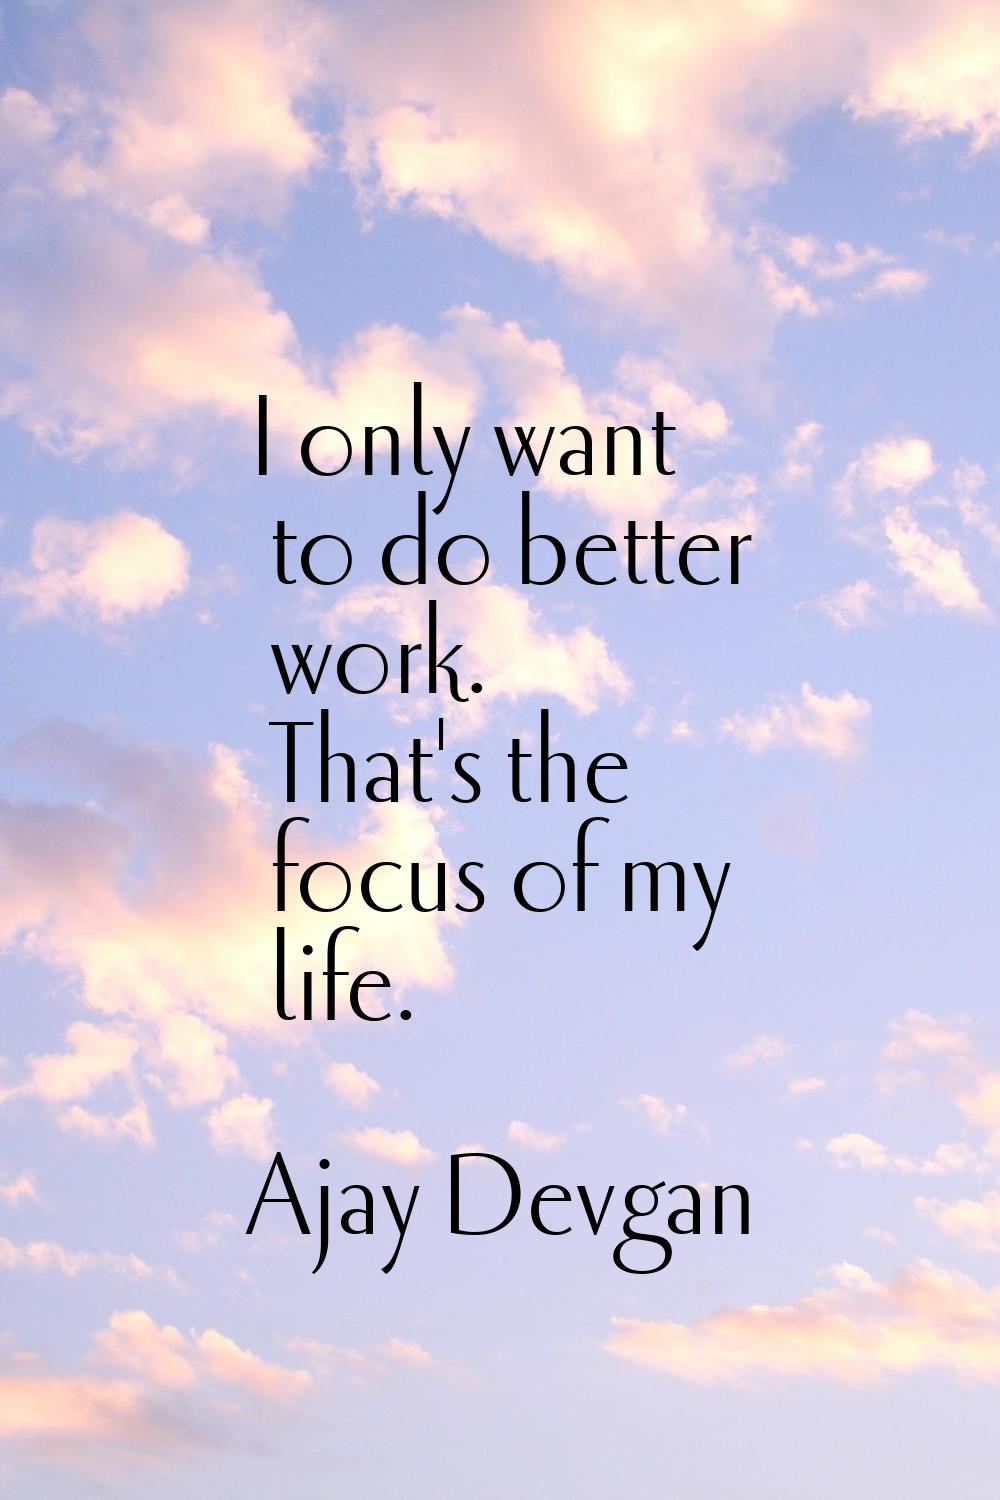 I only want to do better work. That's the focus of my life.